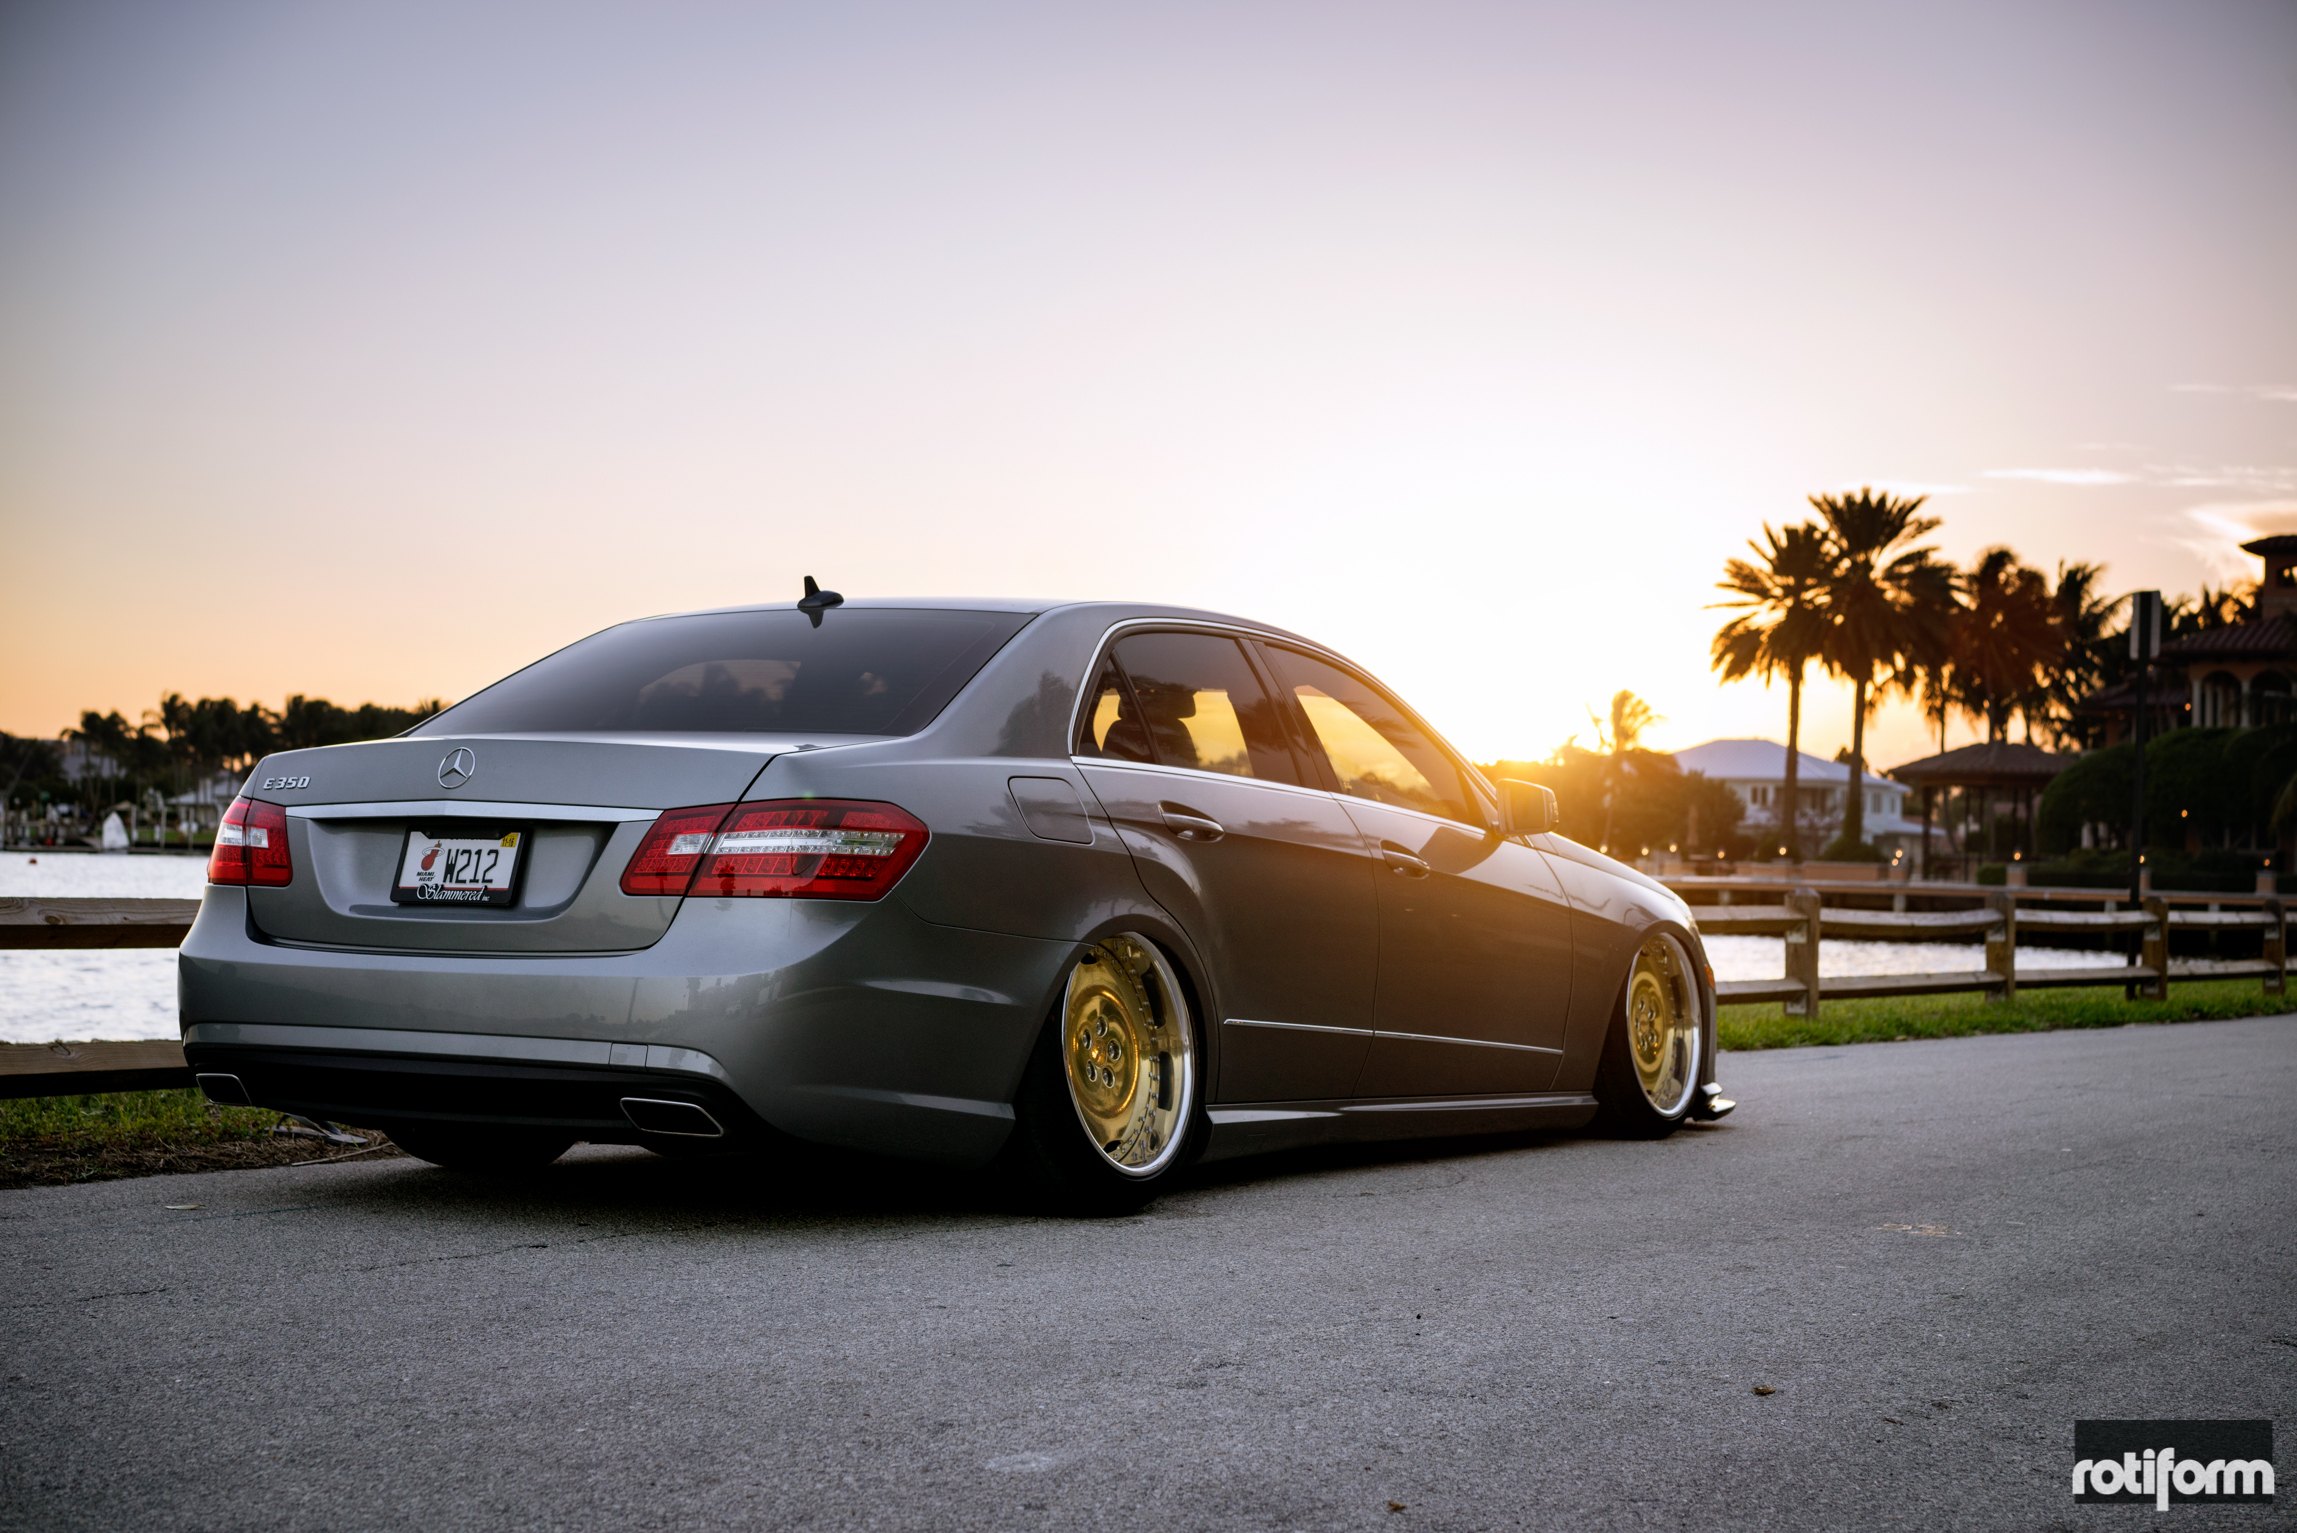 Red LED Taillights on Metallic Mercedes E Class - Photo by Rotiform